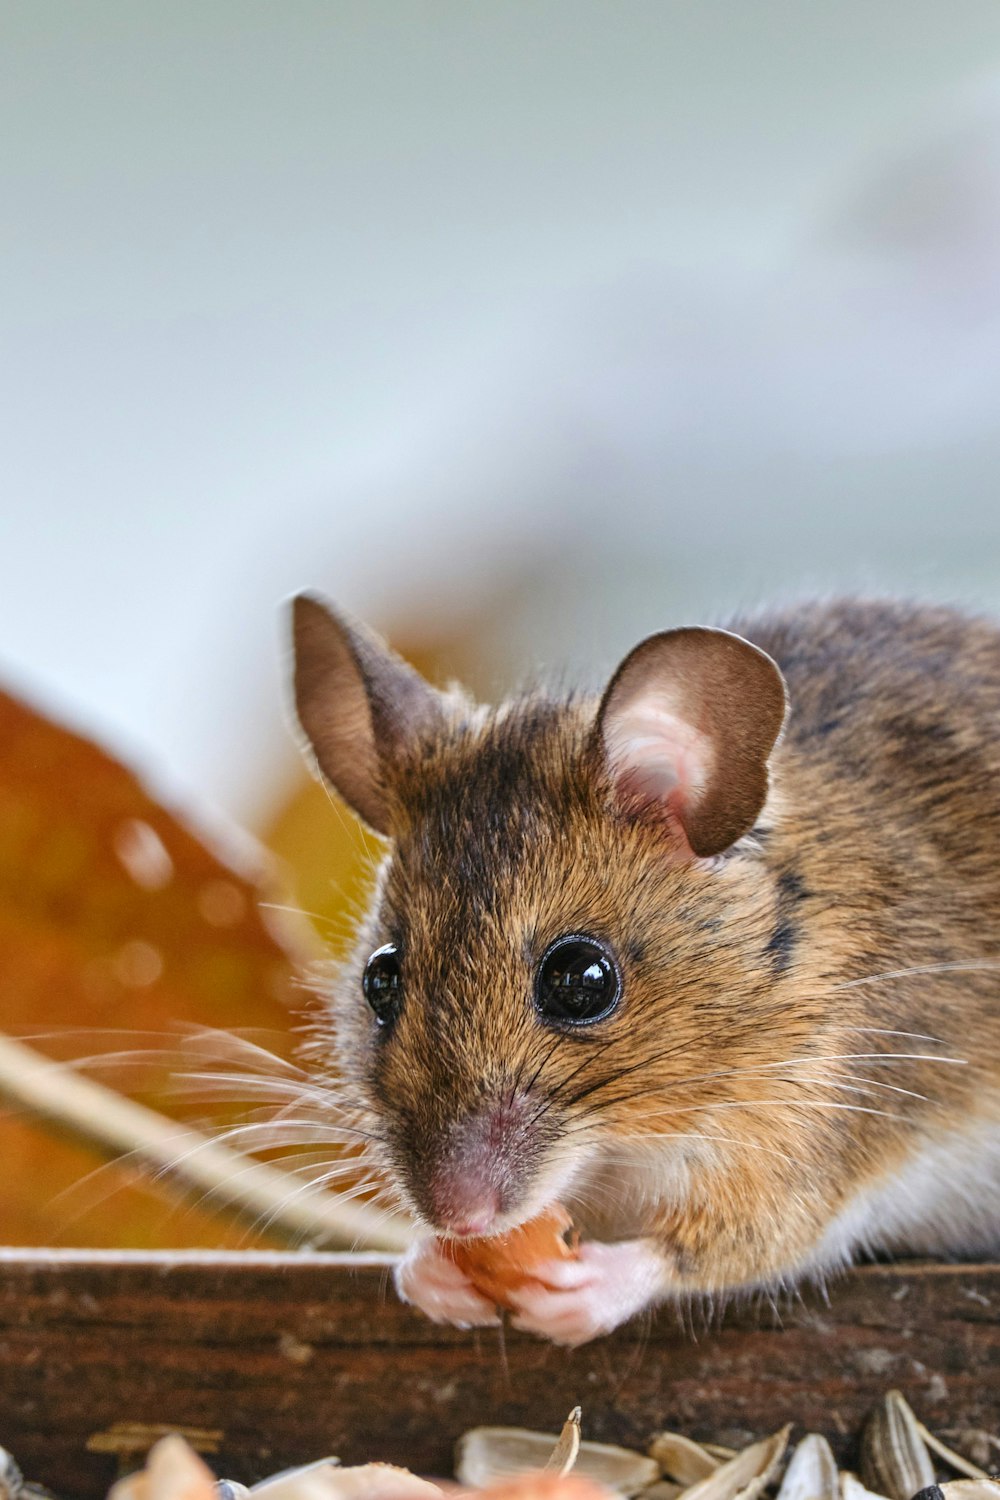 brown and white rodent on orange and white polka dot textile